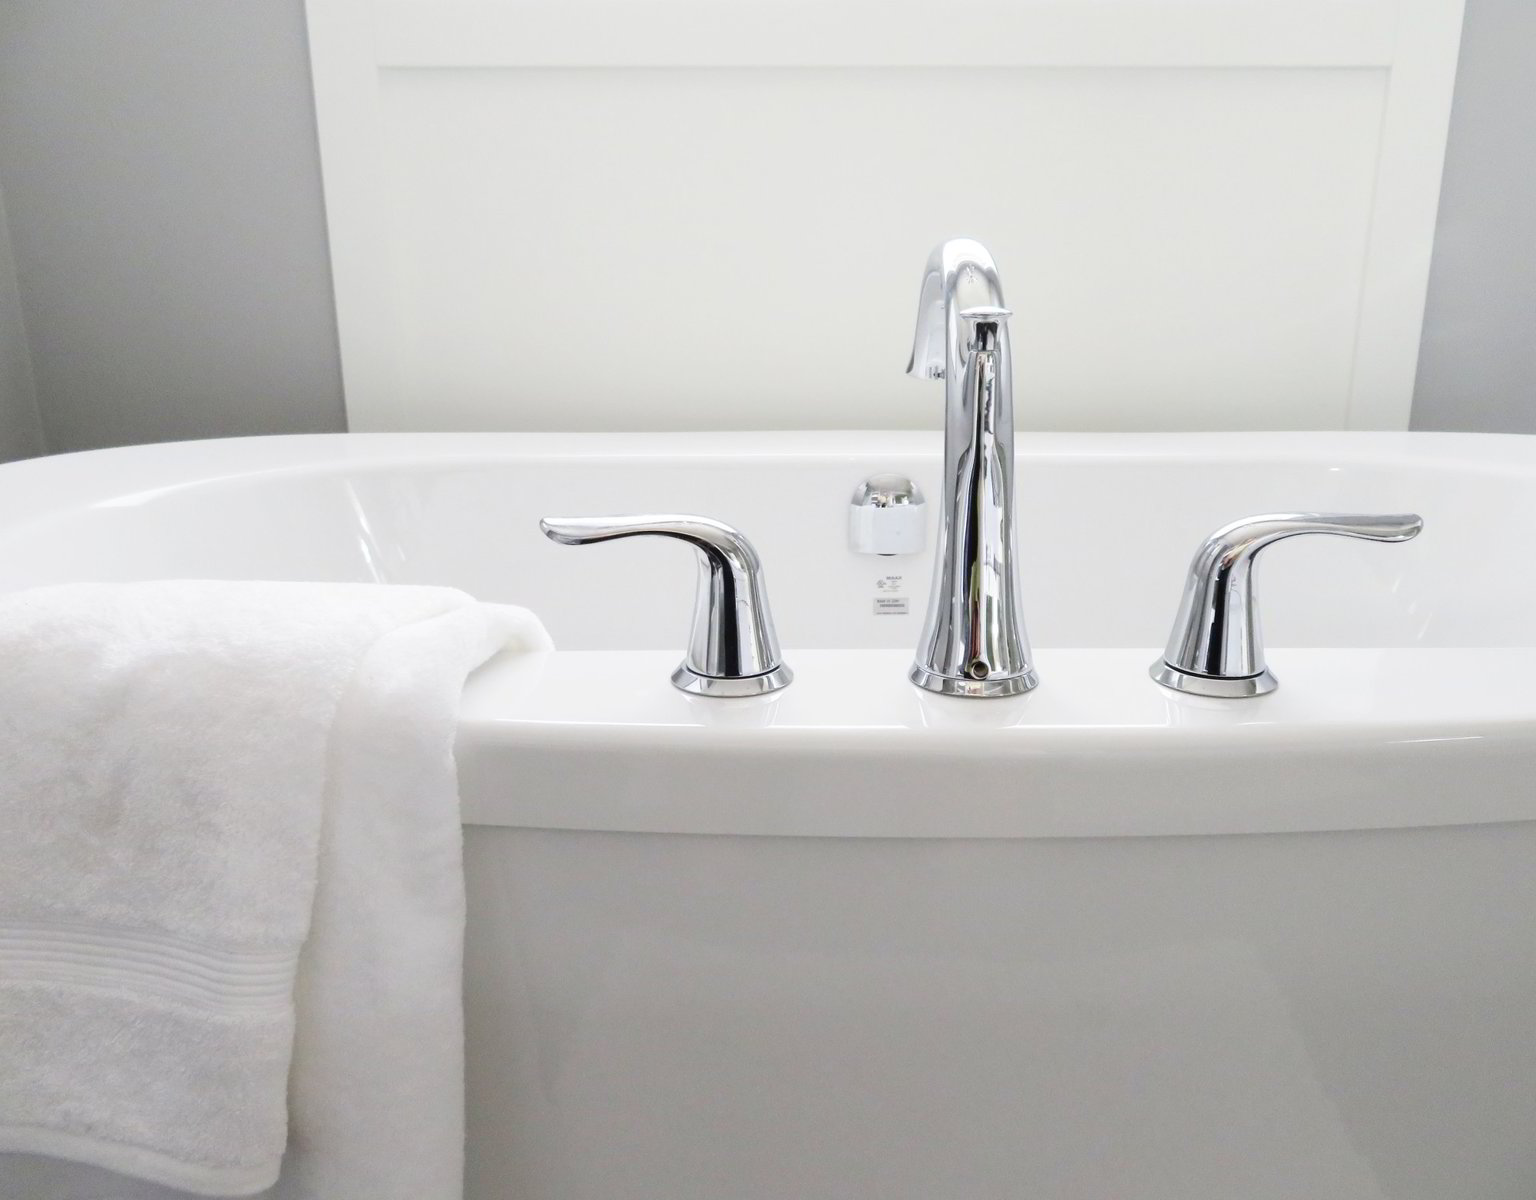 How To Fix A Leaky Bathtub Faucet, How To Replace Bathtub Faucet Stem